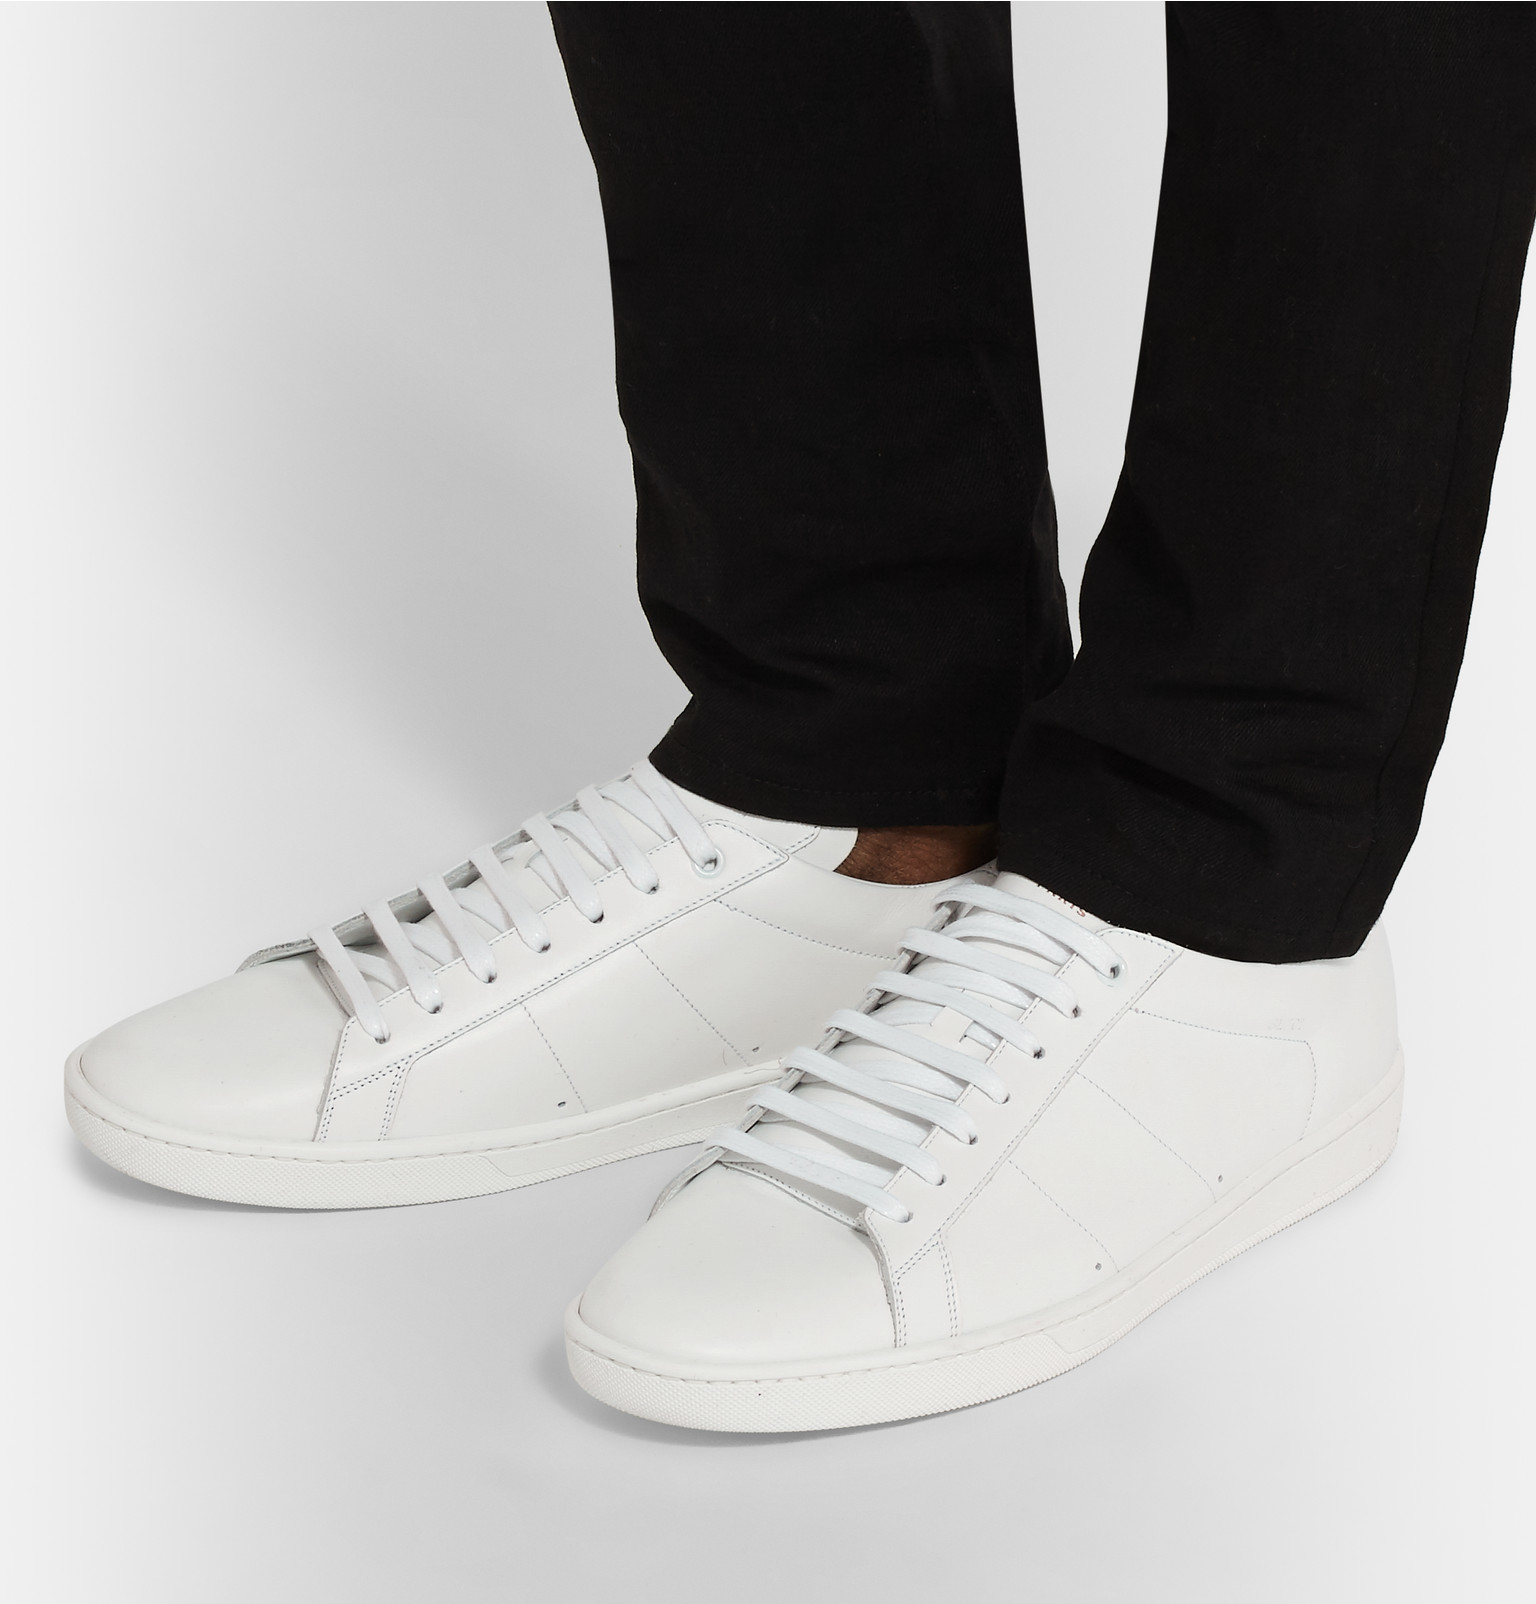 Lyst - Saint Laurent Sl01 Court Classic Leather Sneakers in White for Men